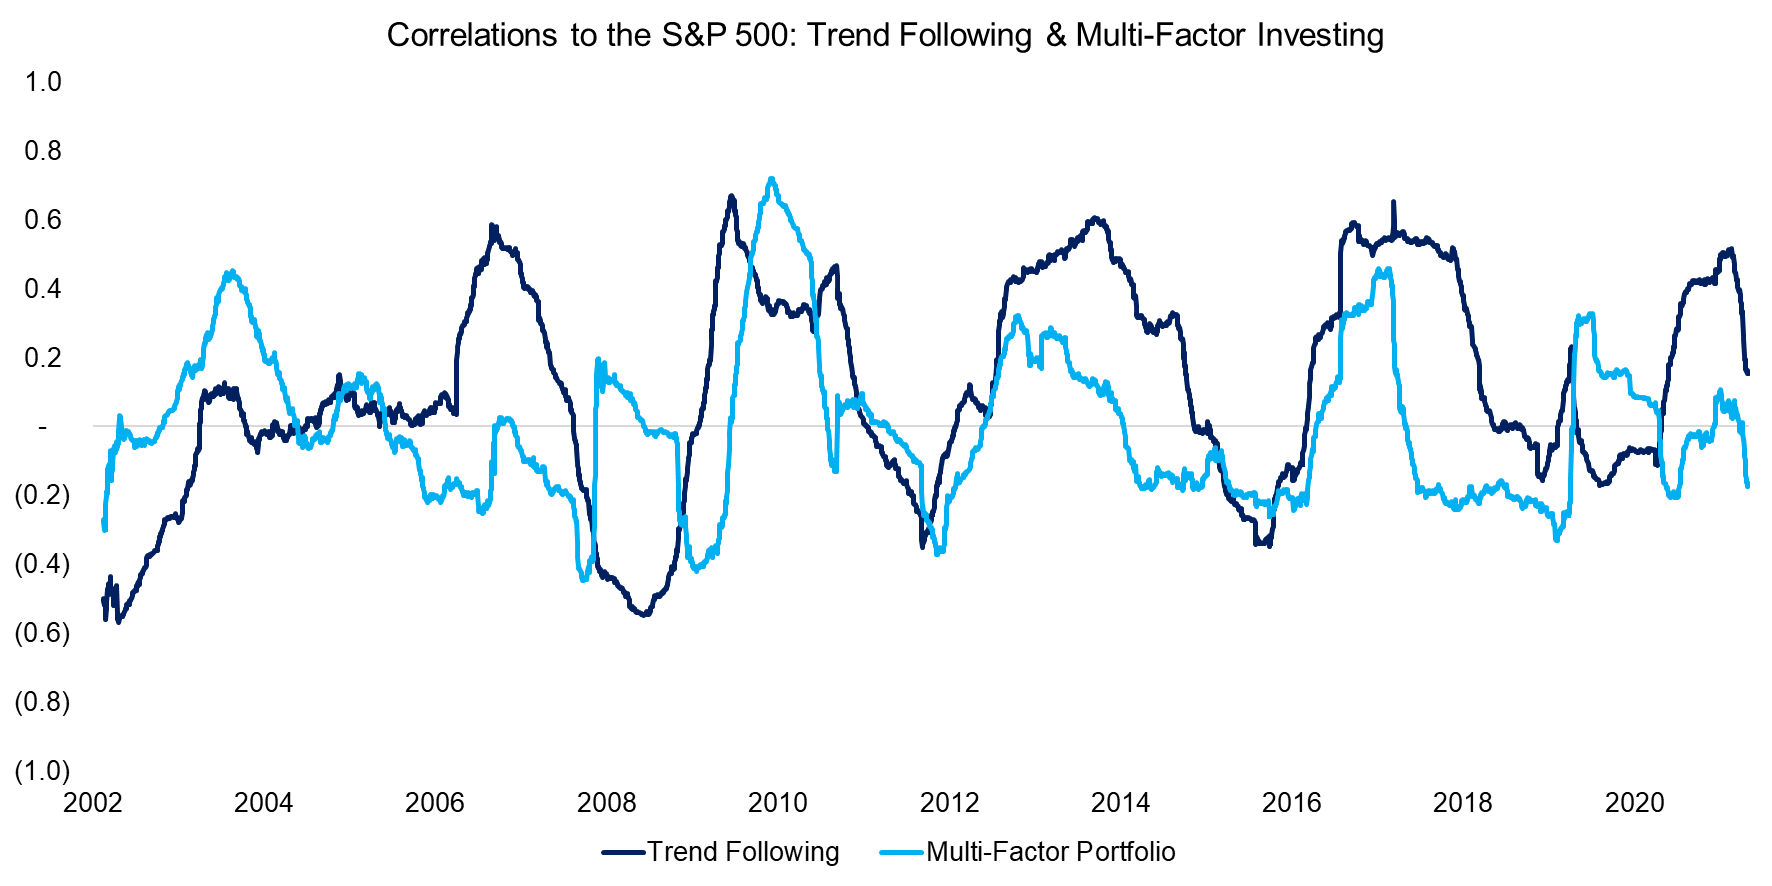 Correlations to the S&P 500 Trend Following & Multi-Factor Investing